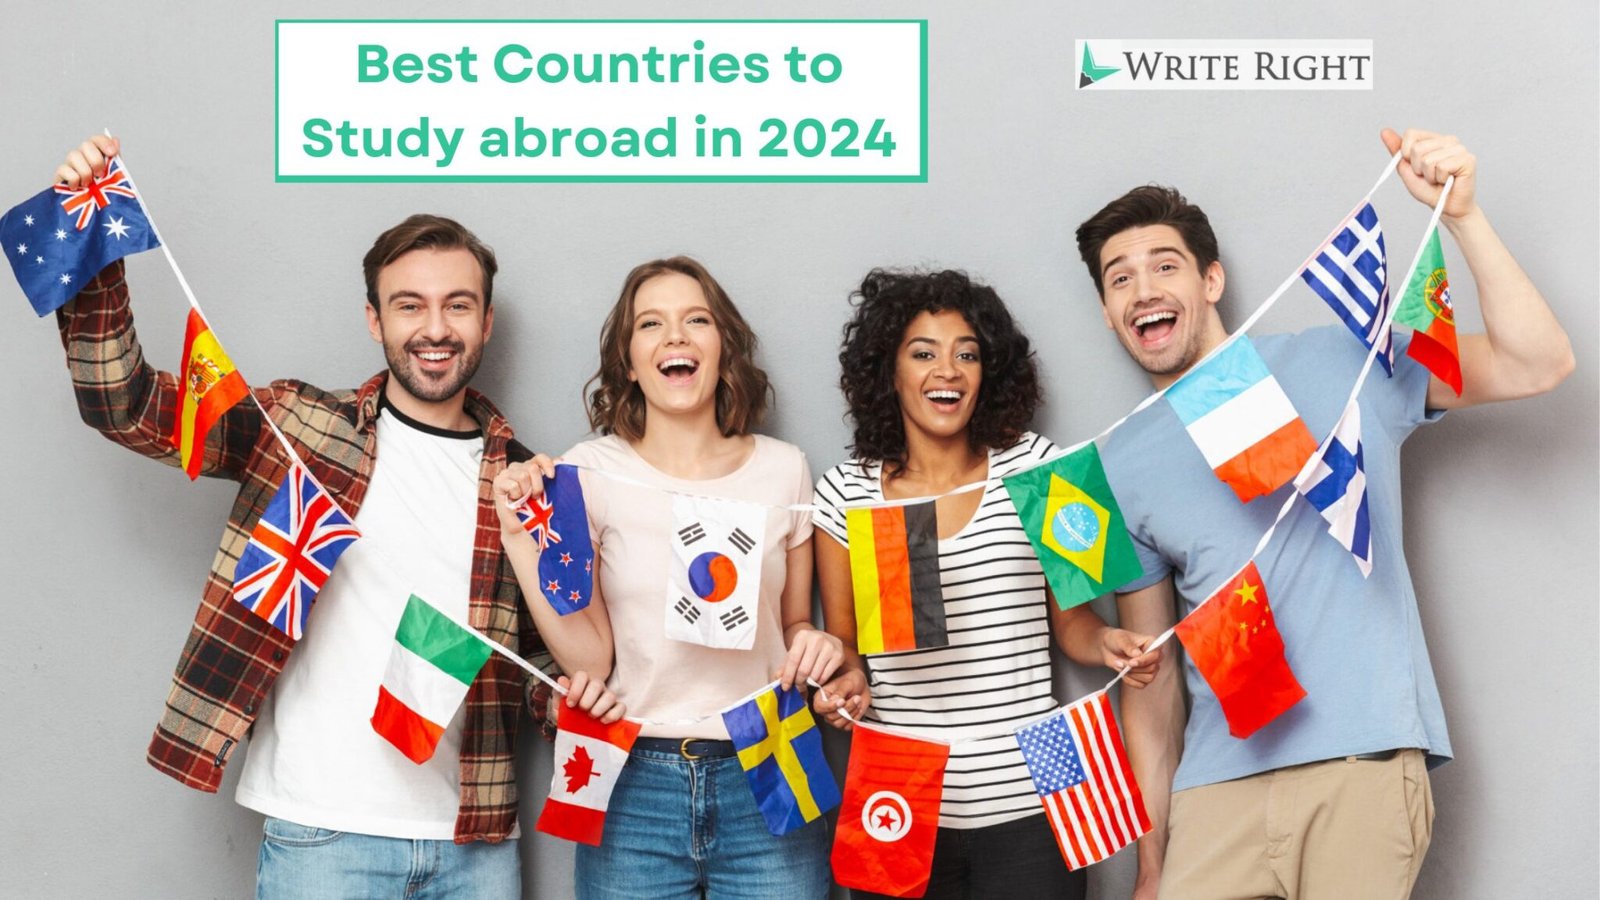 Which are the best countries to study abroad in 2024? Write Right